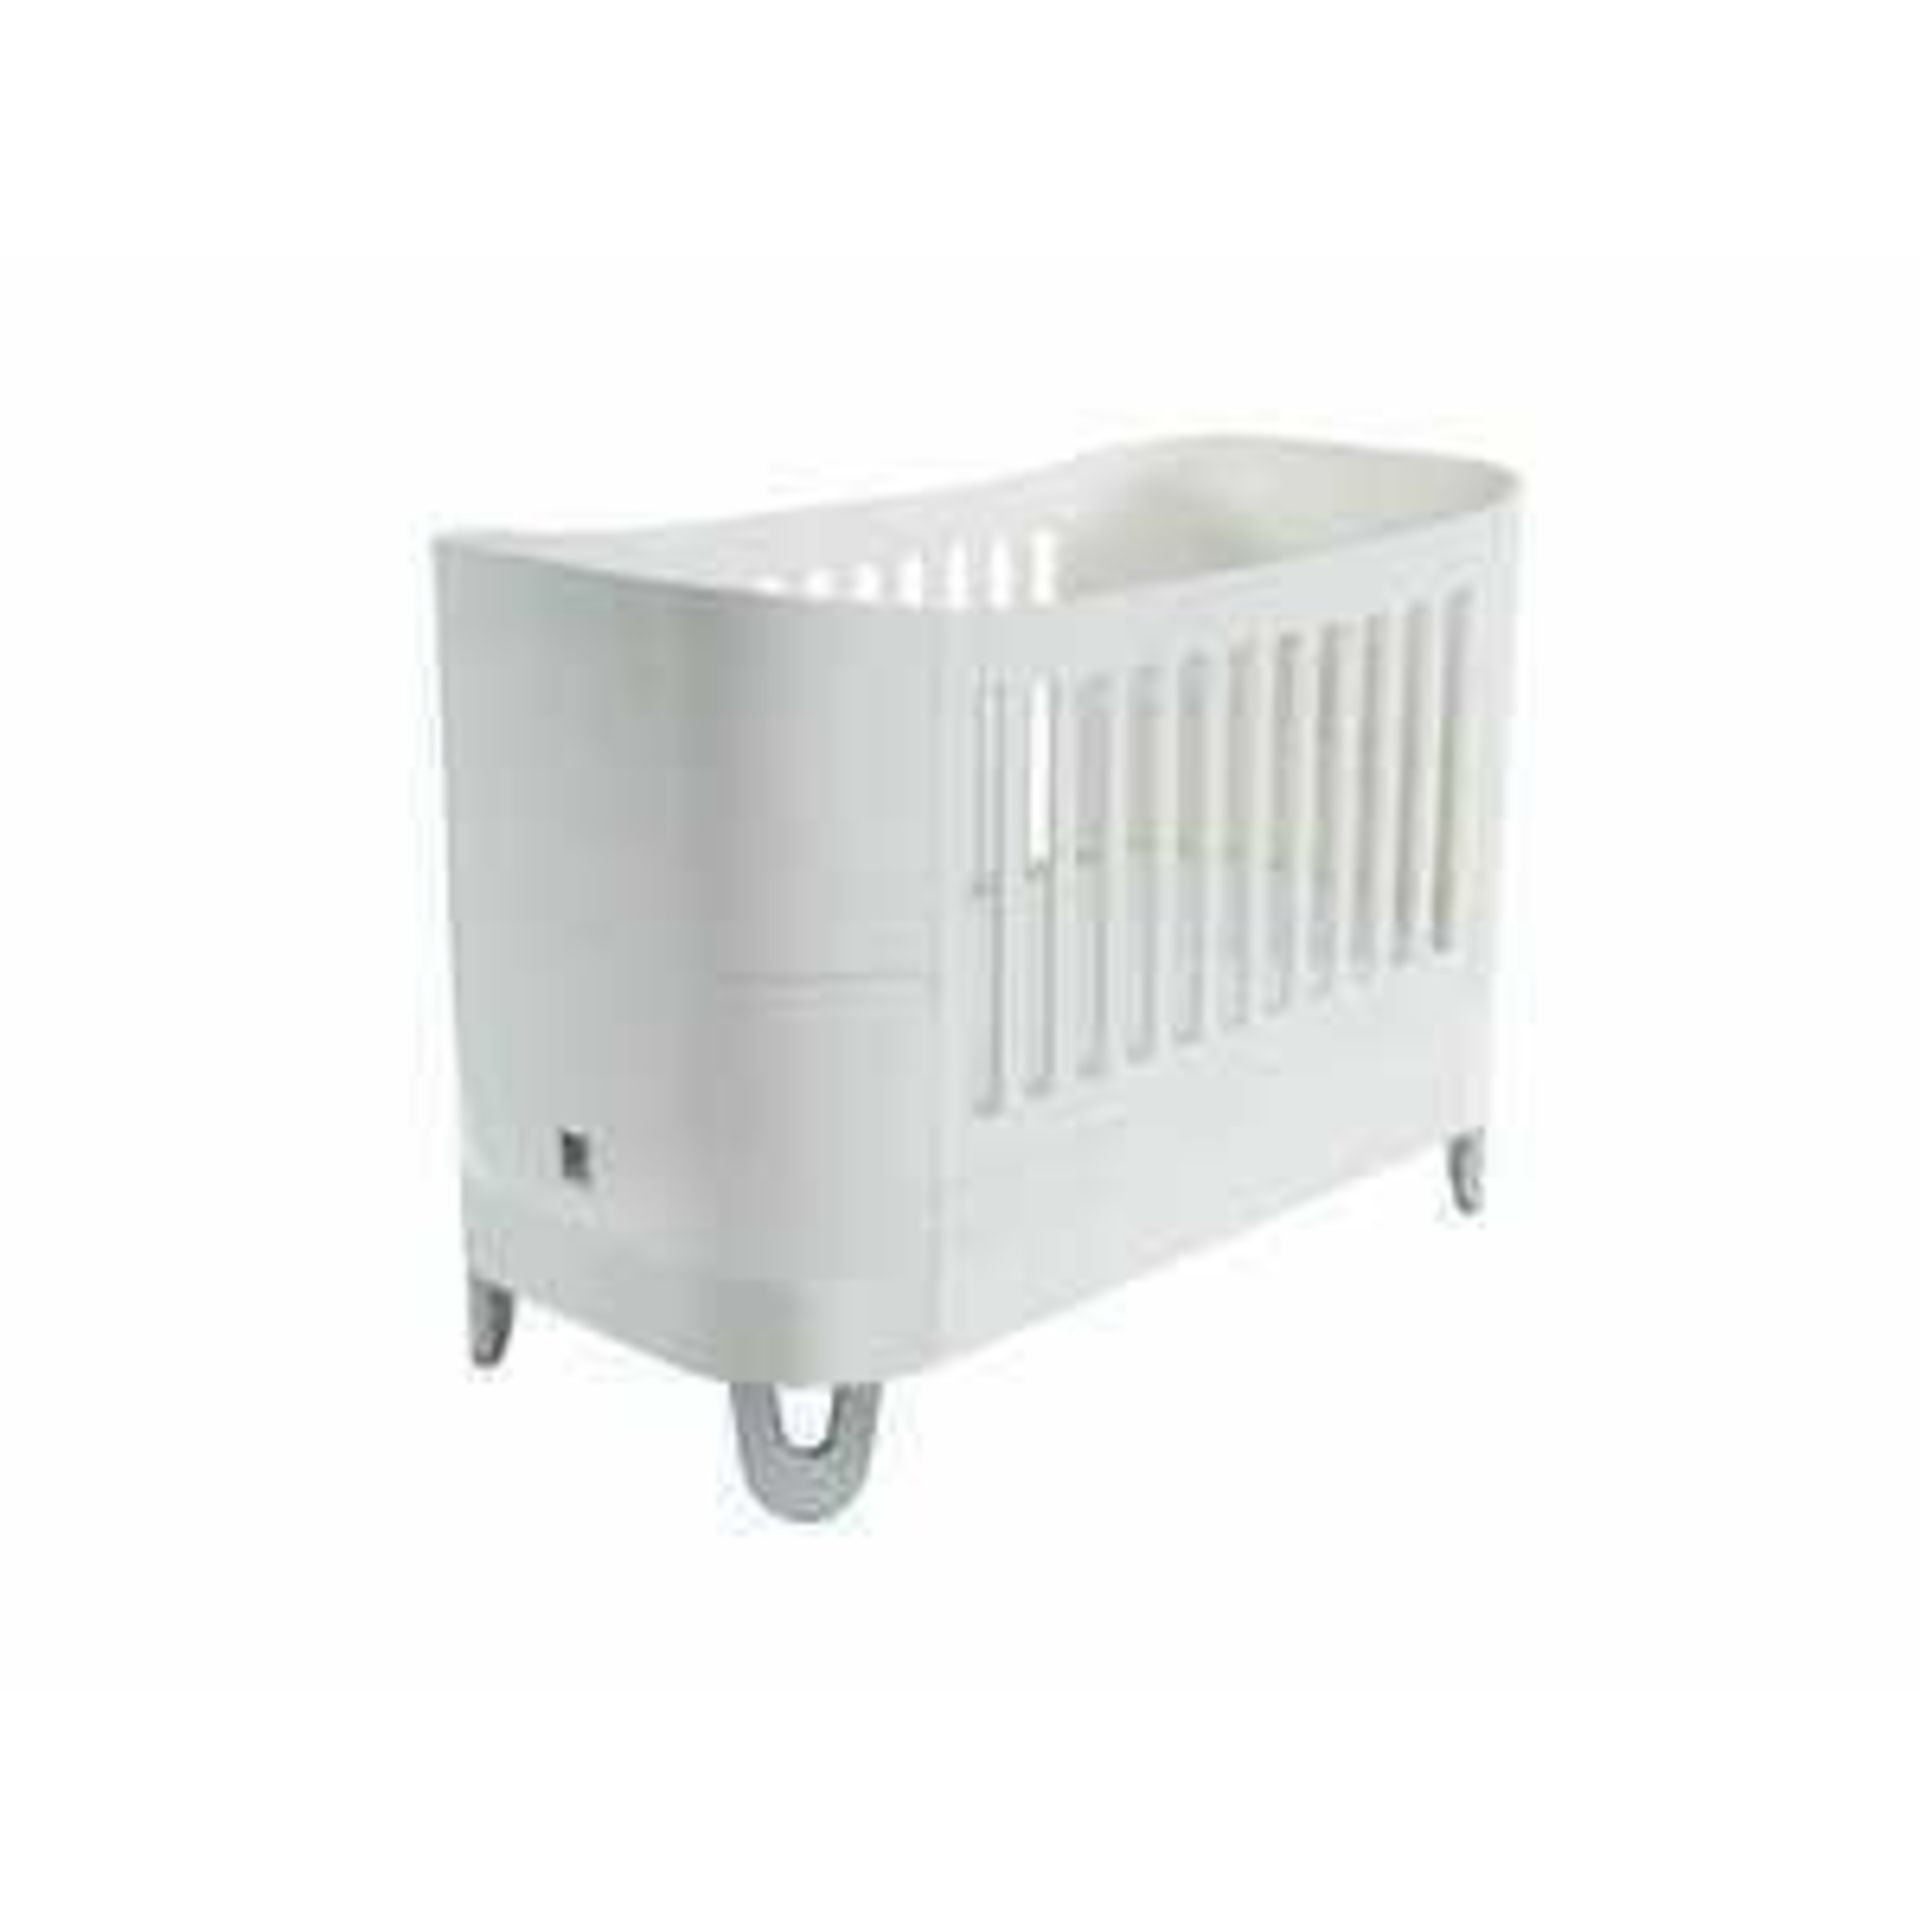 Rrp £600 Boxed Gaia Baby Serena Sleep Part Lot Only - Image 2 of 2